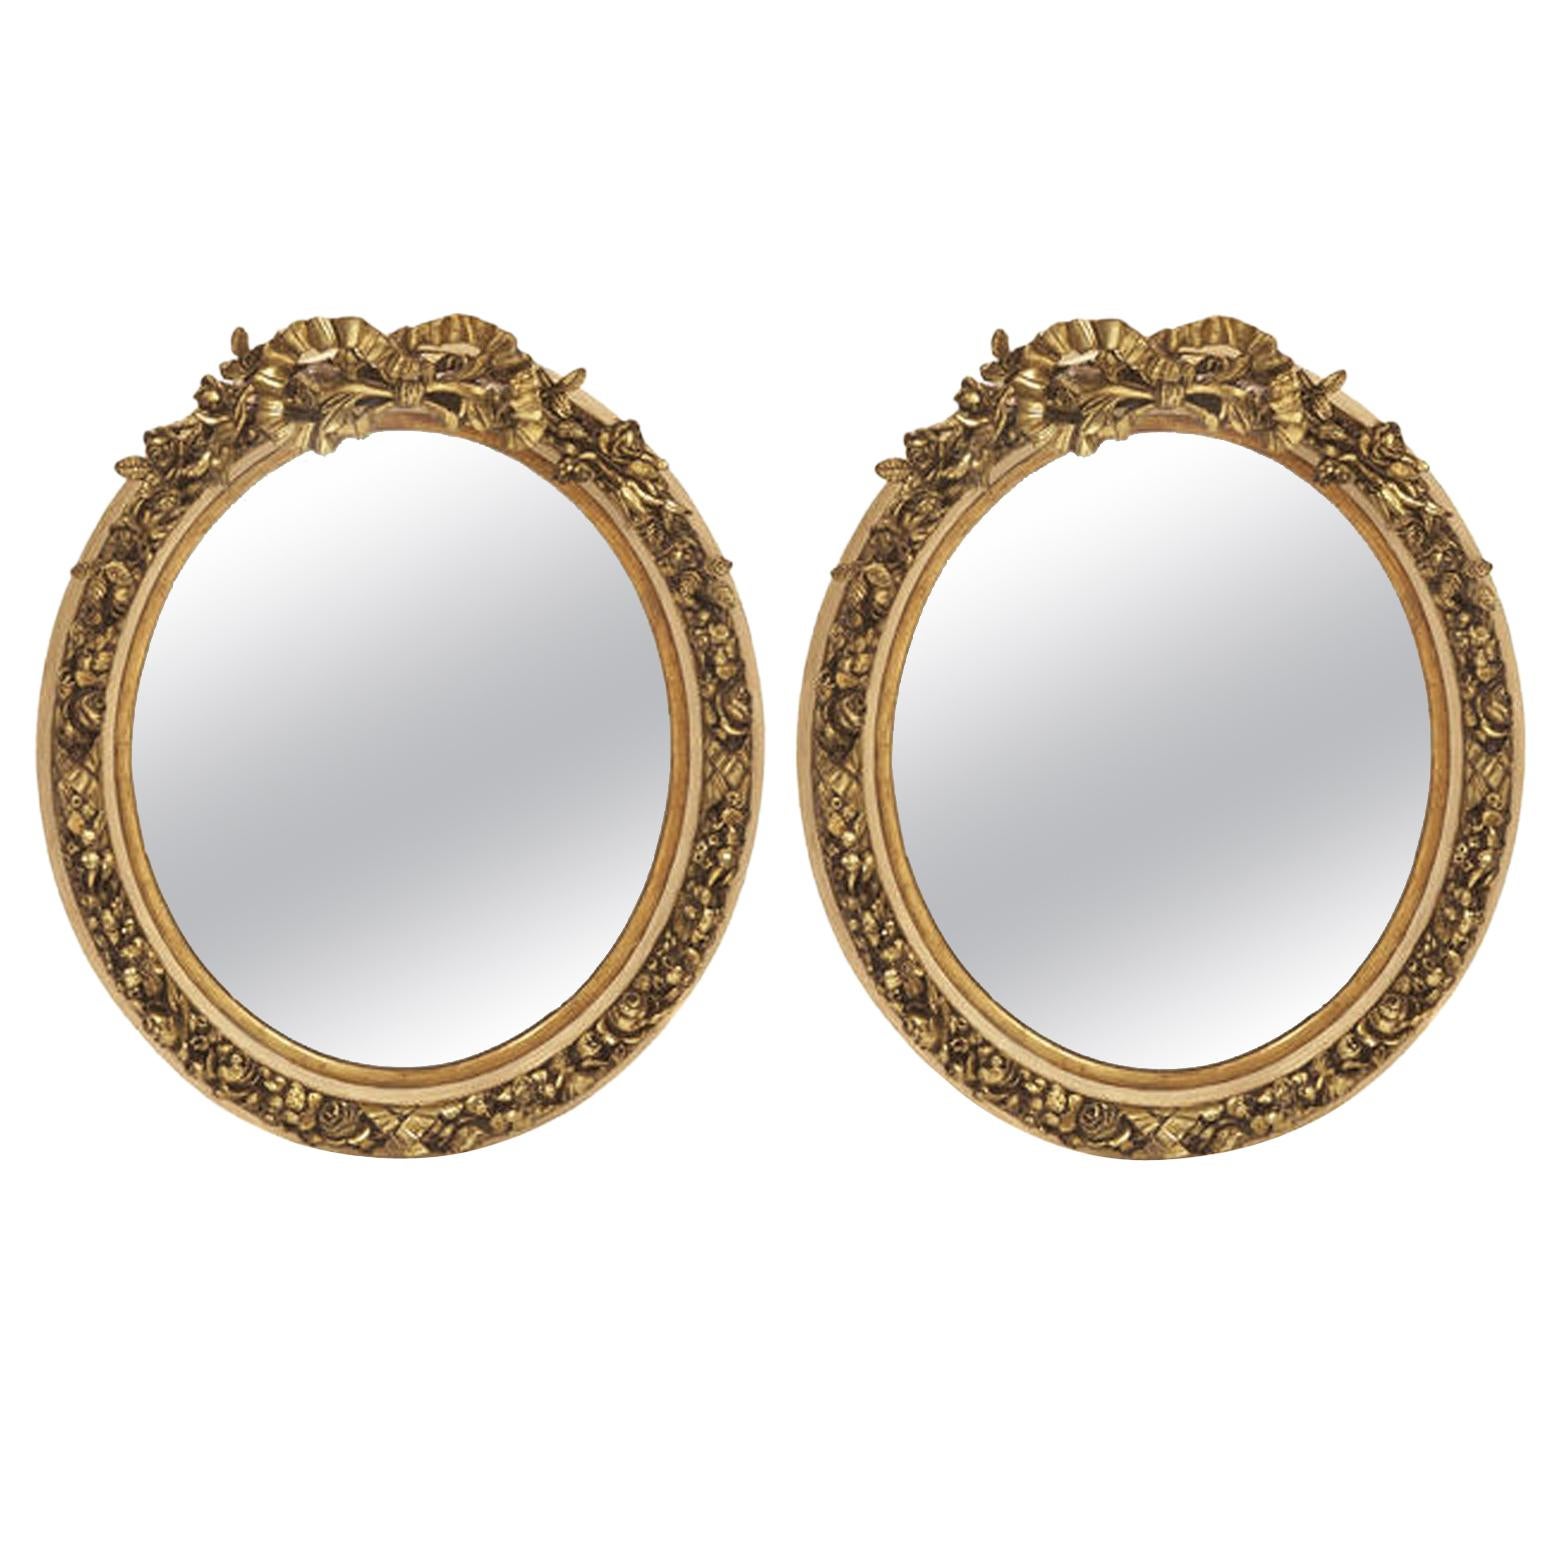 Pair of French Louis XV Style Gilt Oval Mirrors